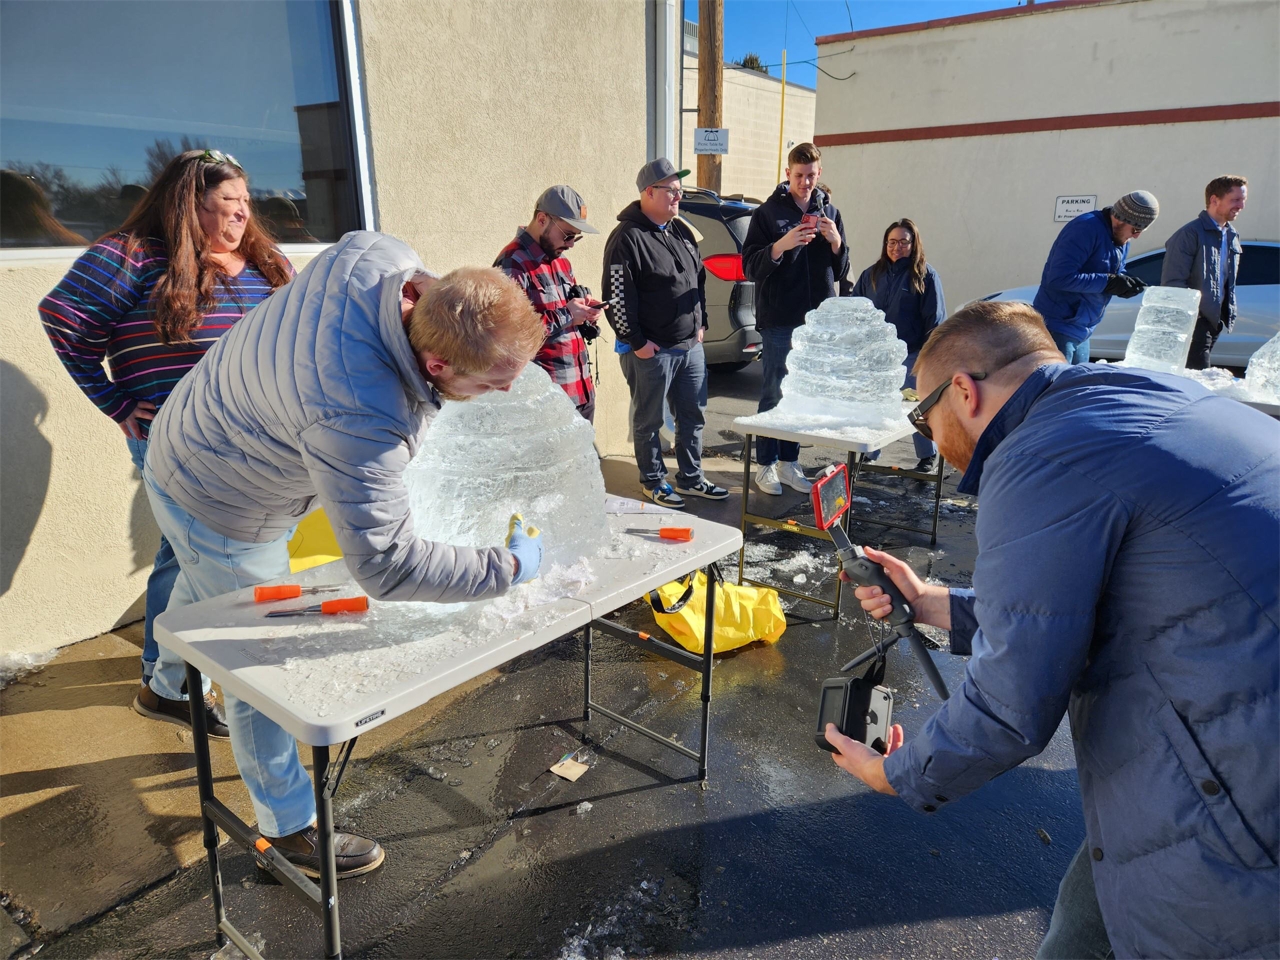 Making ice sculptures in the back parking lot